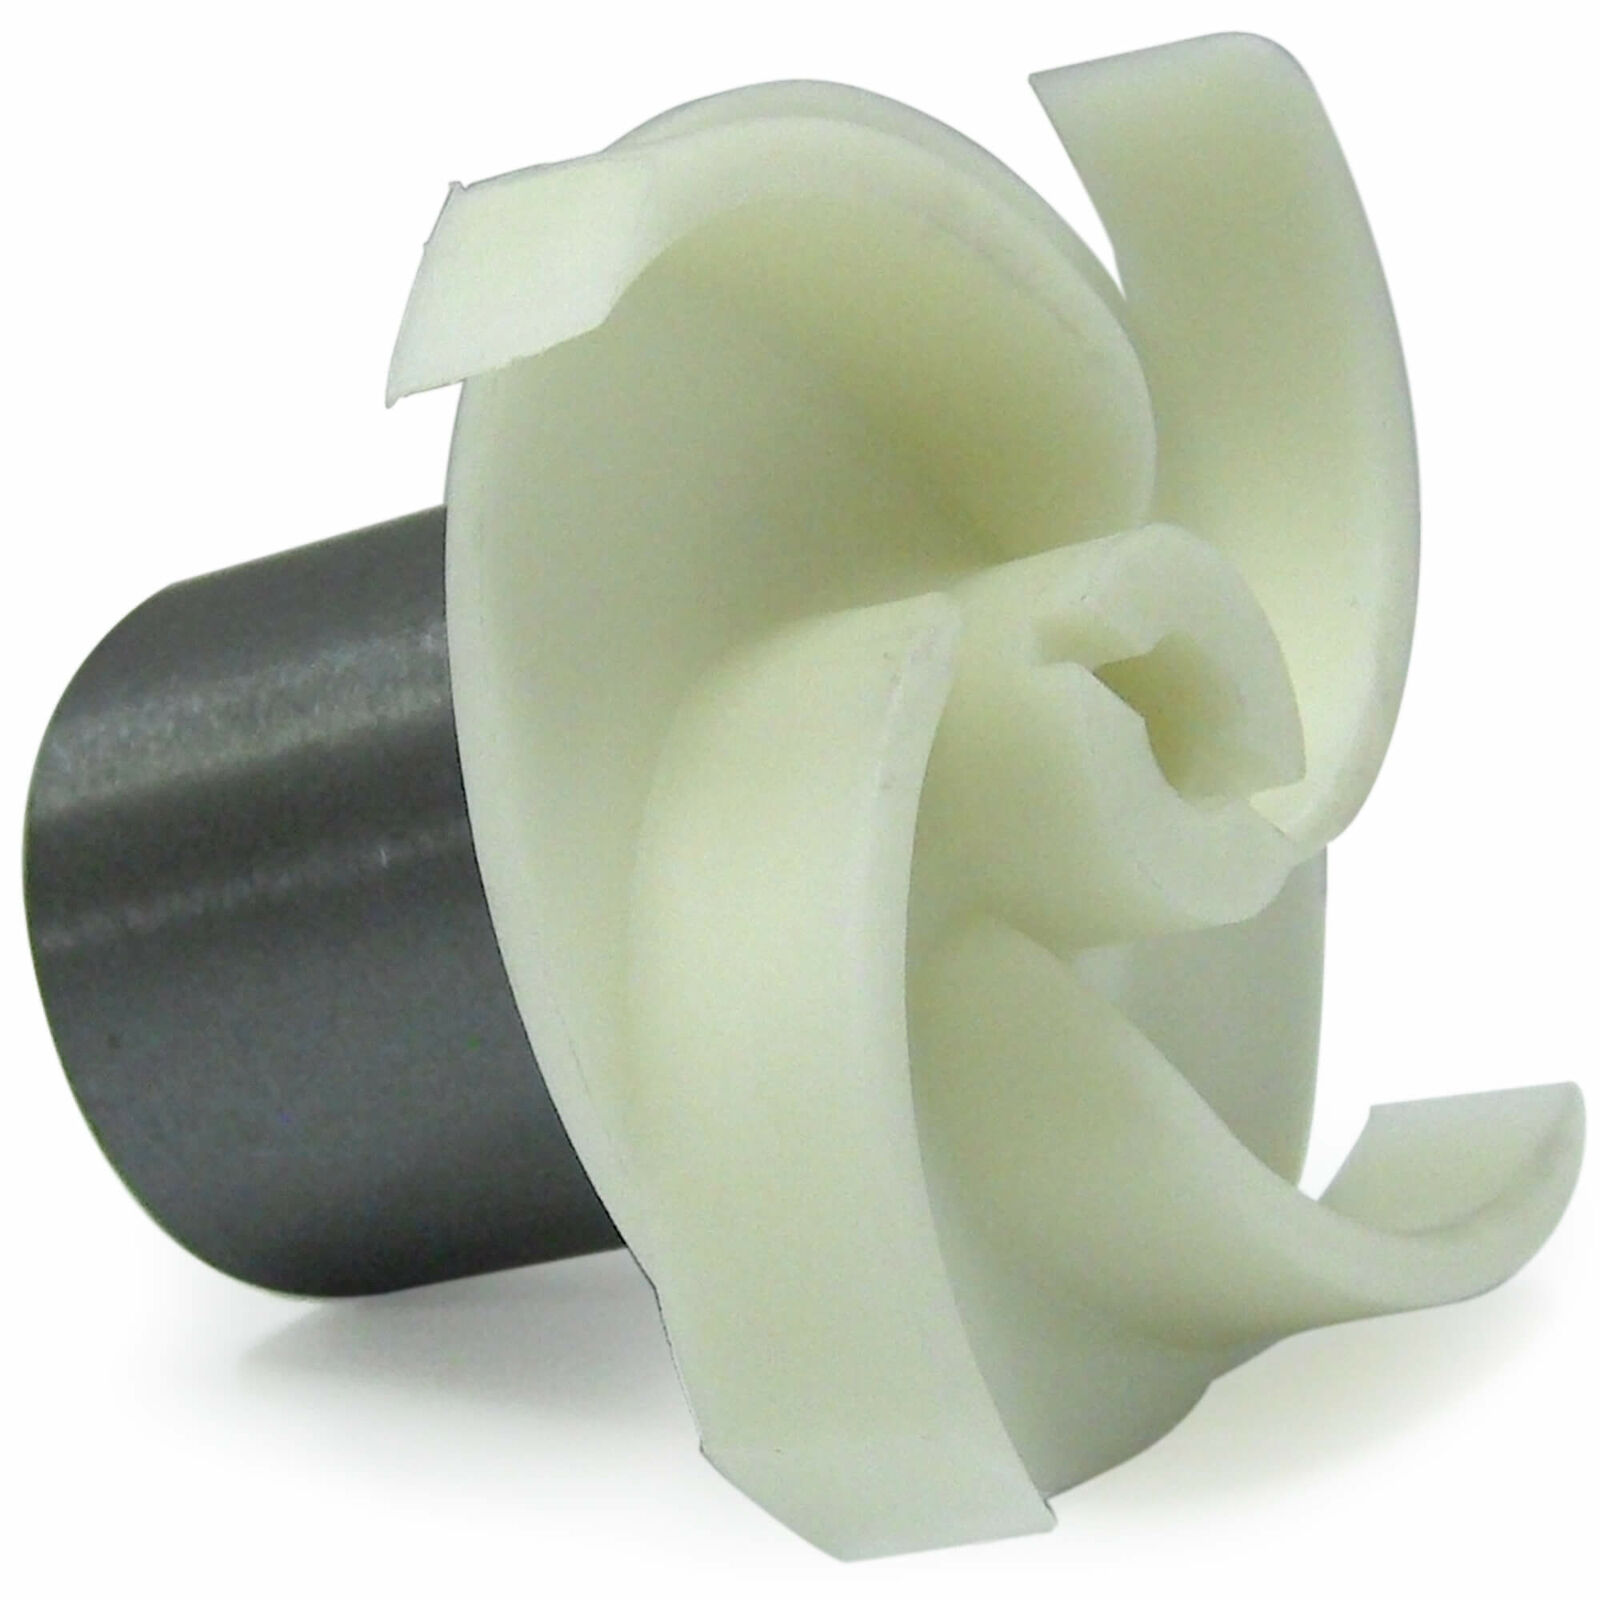 March 0130-0020-0100 Pump Impeller for AC-3CP-MD LC-3CP-MD